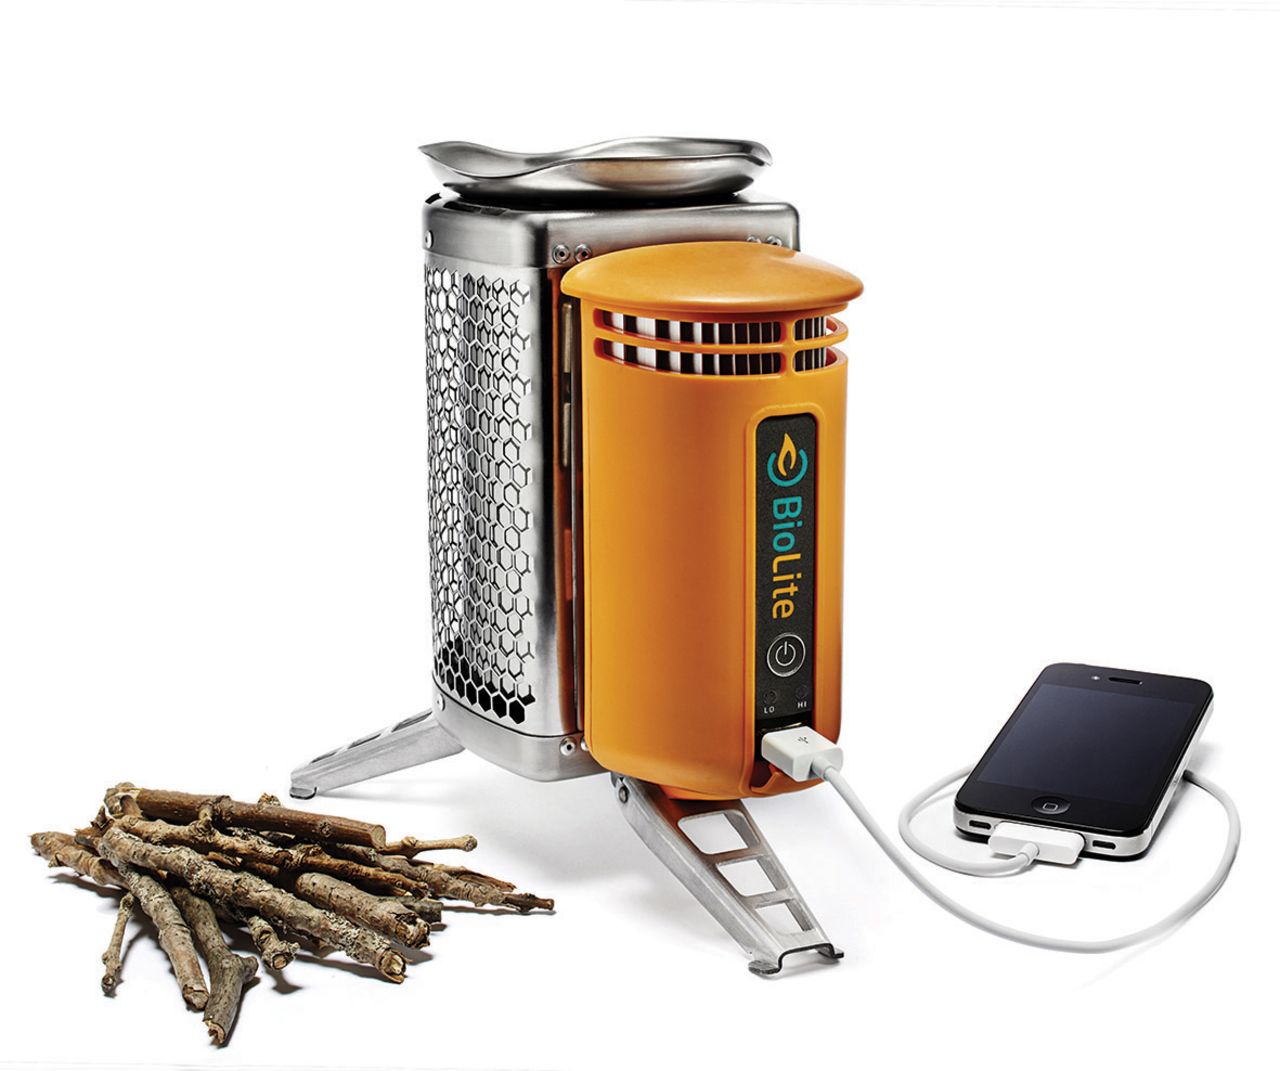 By burning a few sticks, the BioLite CampStove generates enough electricity to charge multiple electronic devices while cooking your beans.